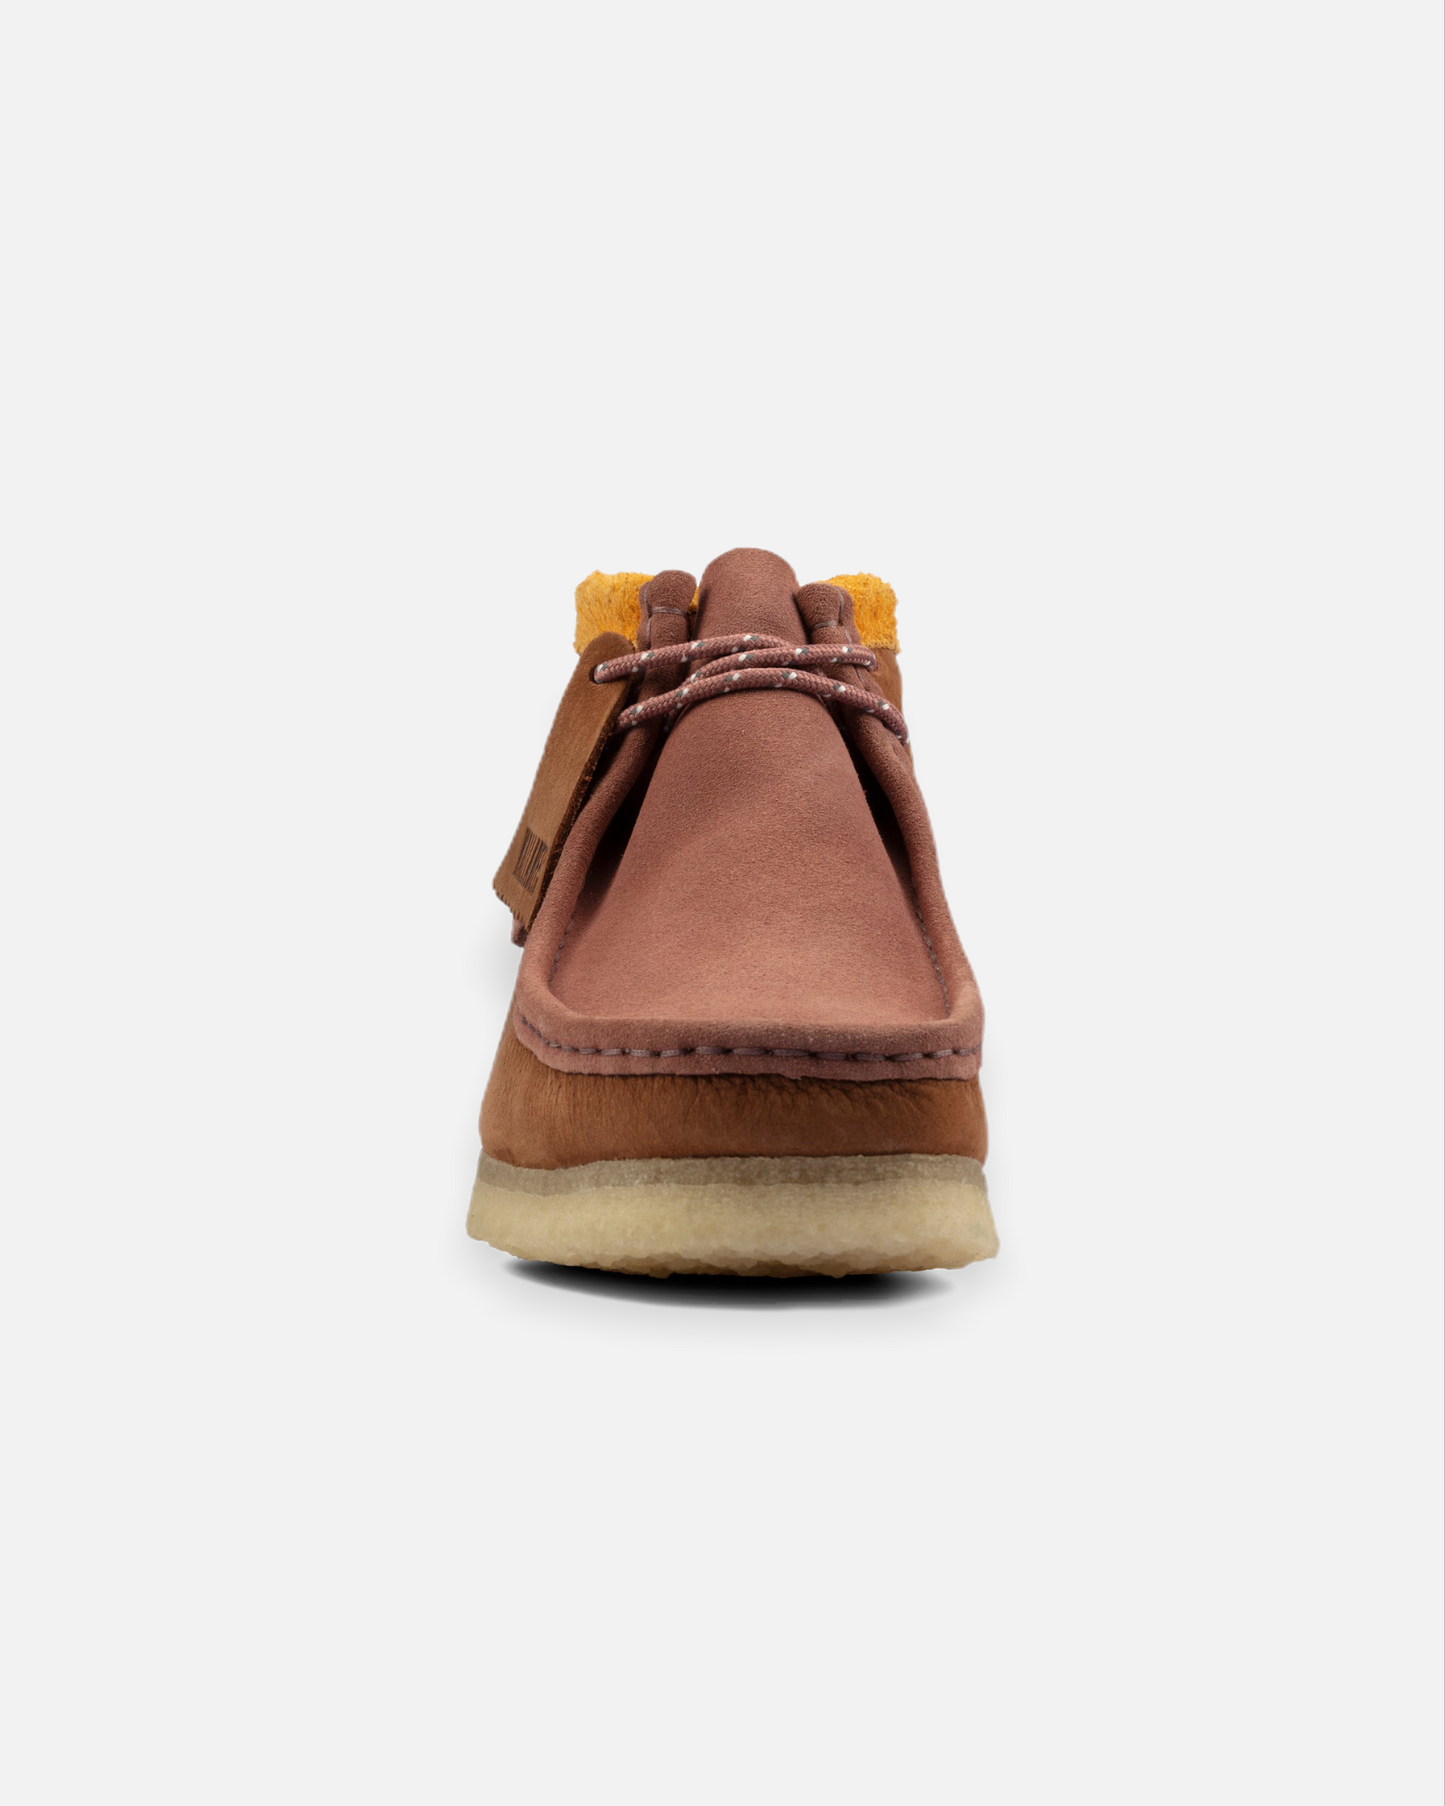 WALLABEE BOOT (BROWN)